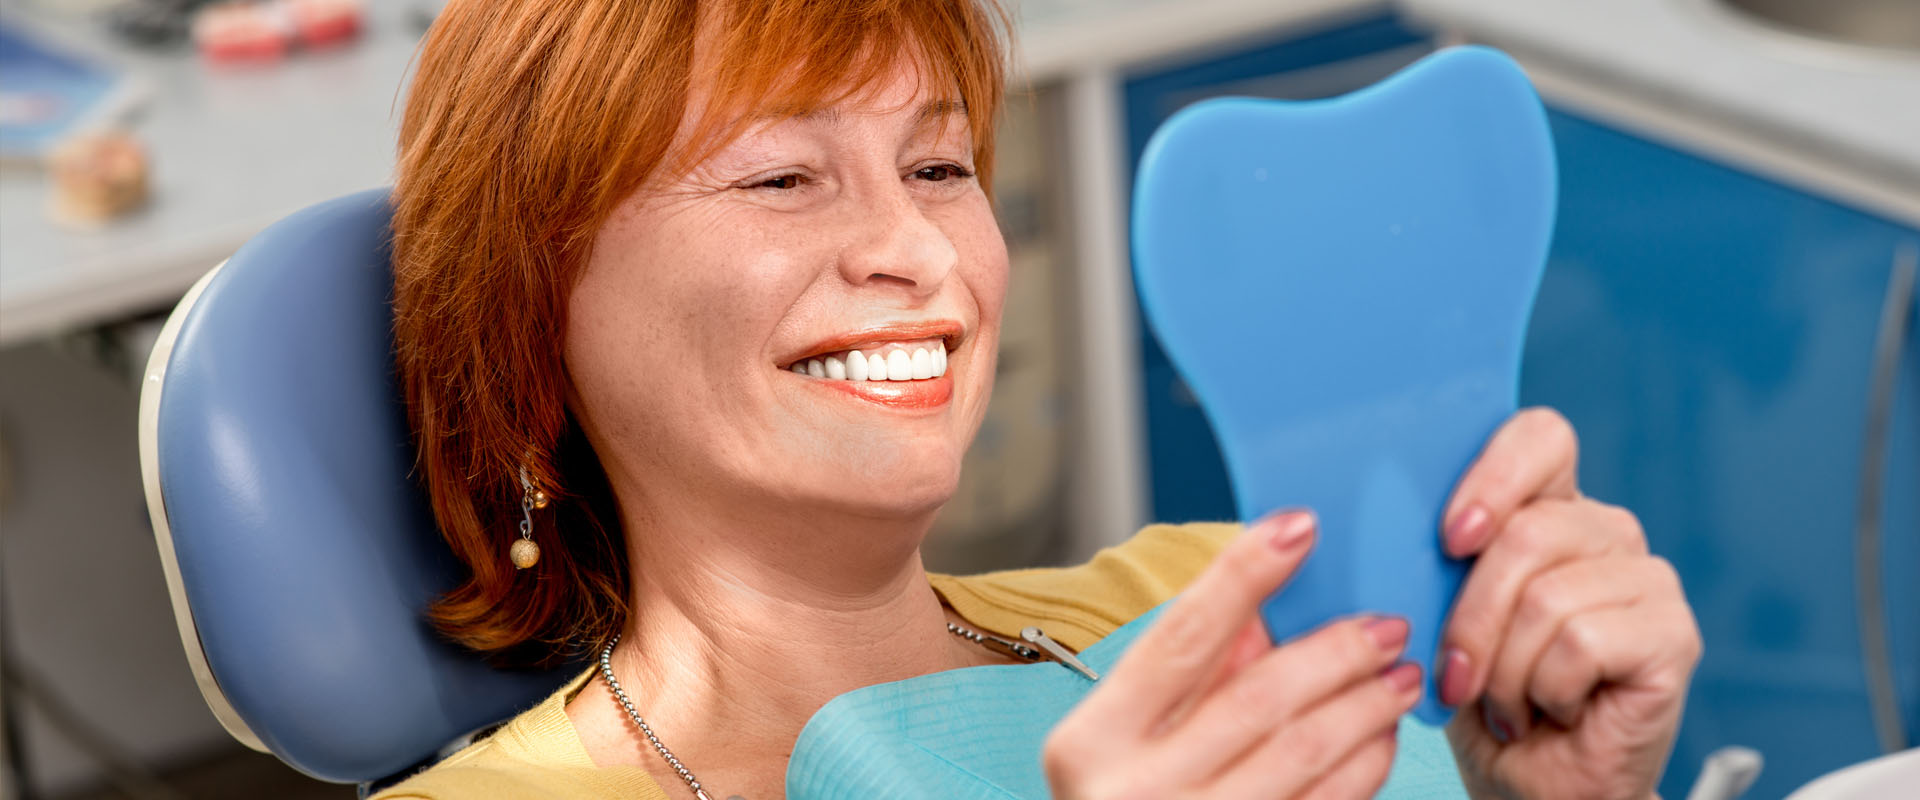 When Are All-on-4 Dental Implants the Best Option? Factors to Consider